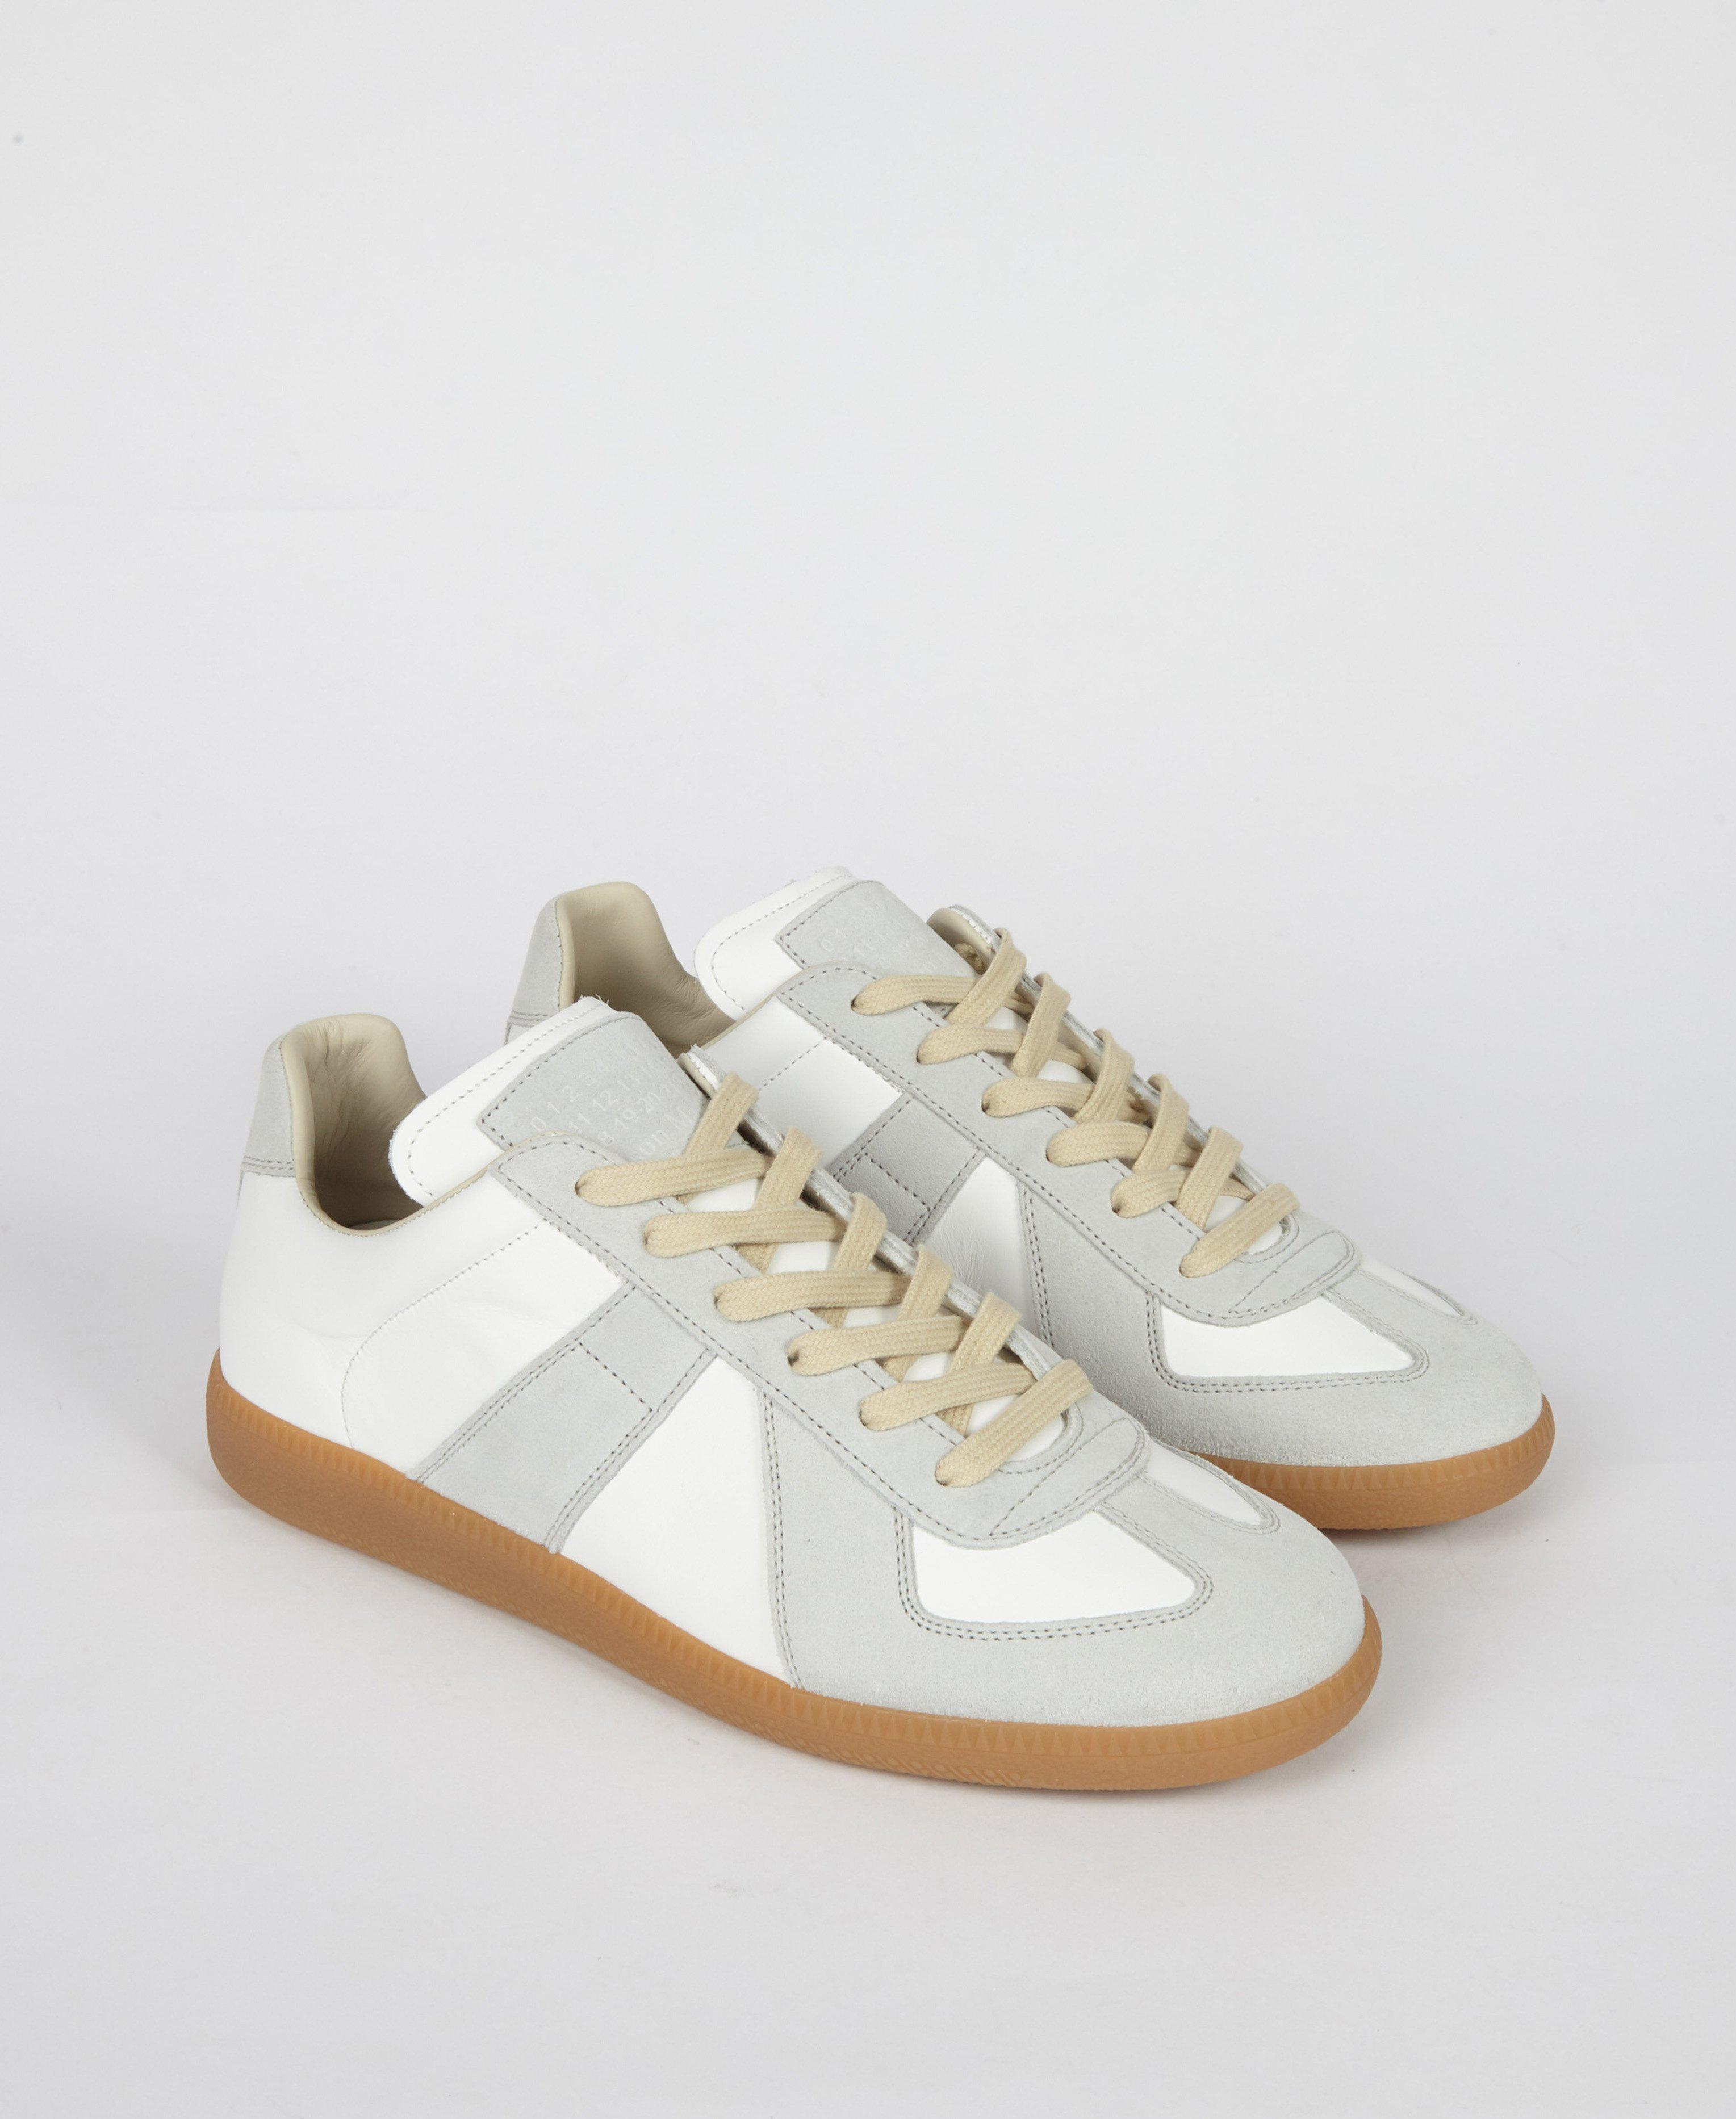 Lyst - Maison Margiela 22 Replica Trainer Low in White for Men - Save 30.0%